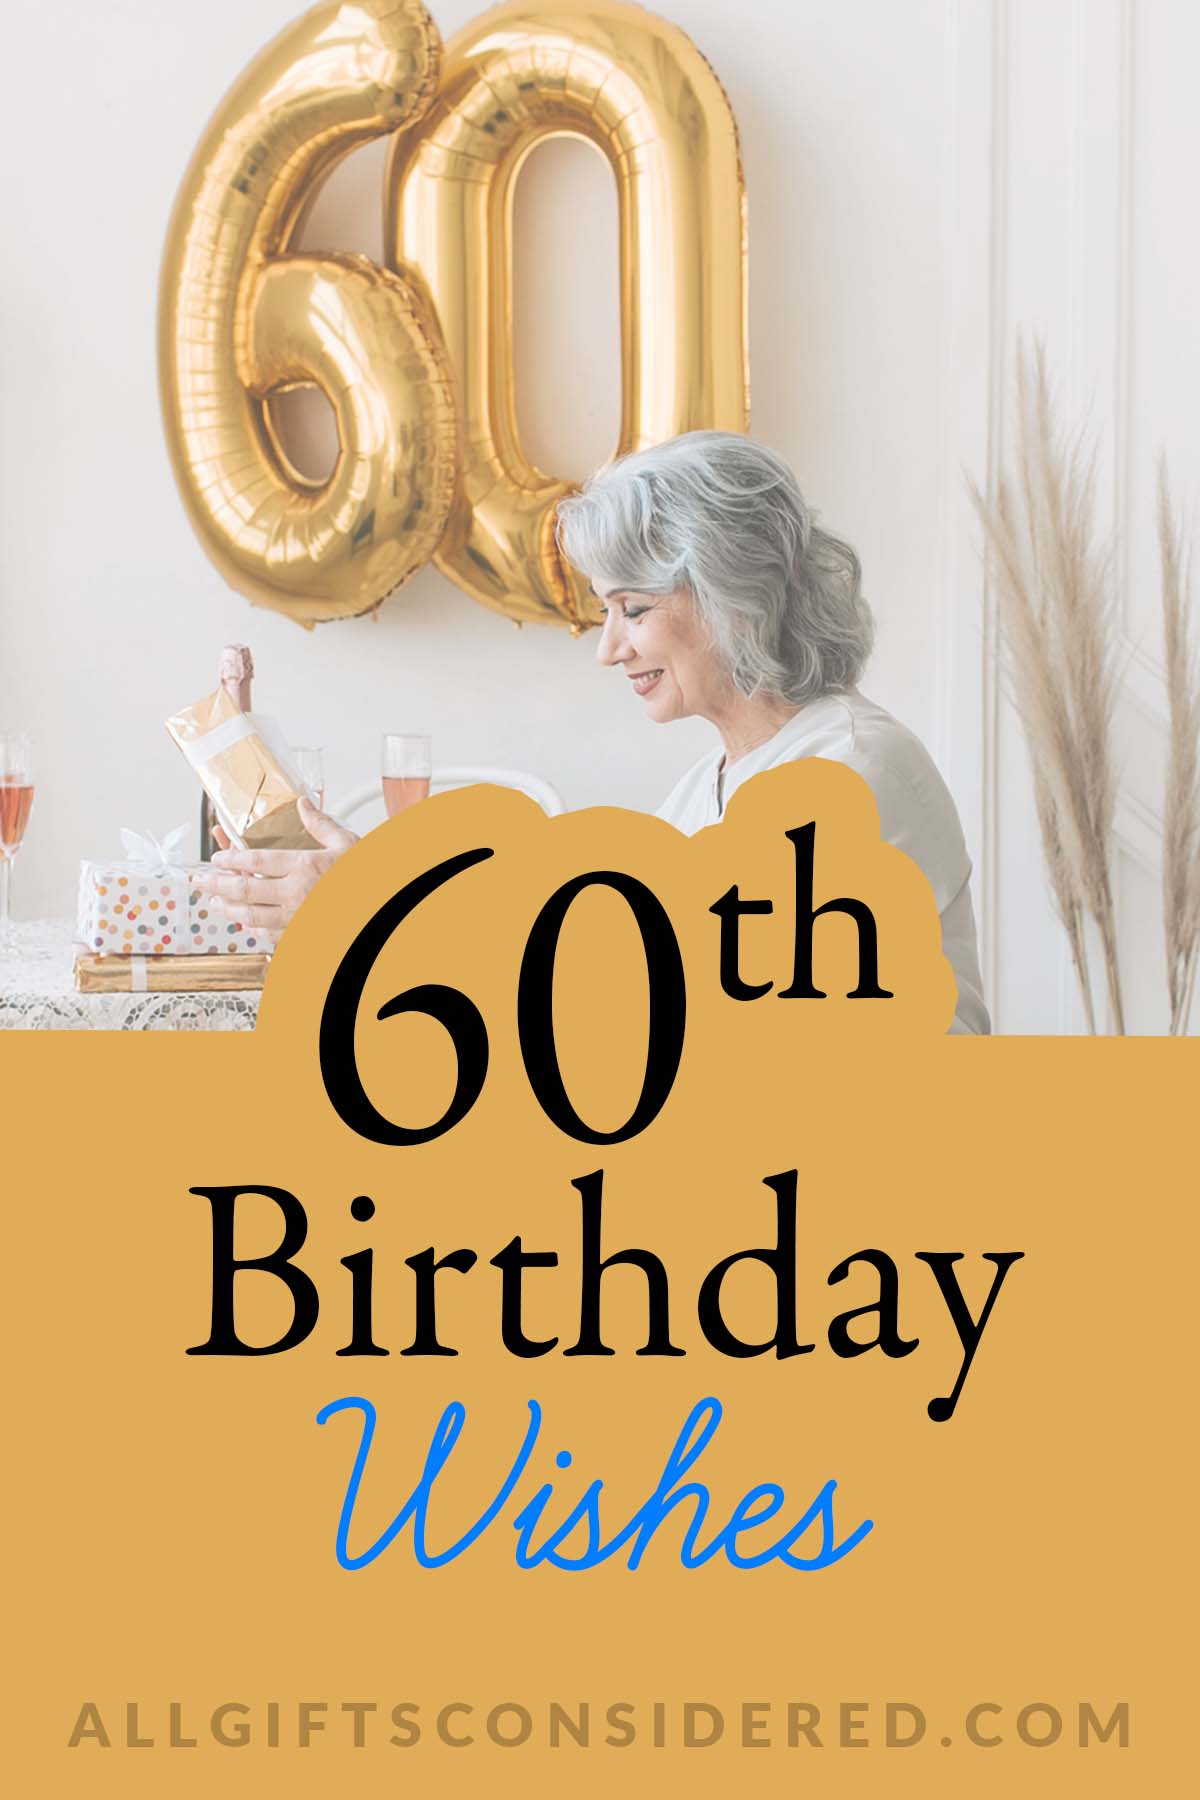 100 Best 60th Birthday Wishes » All Gifts Considered